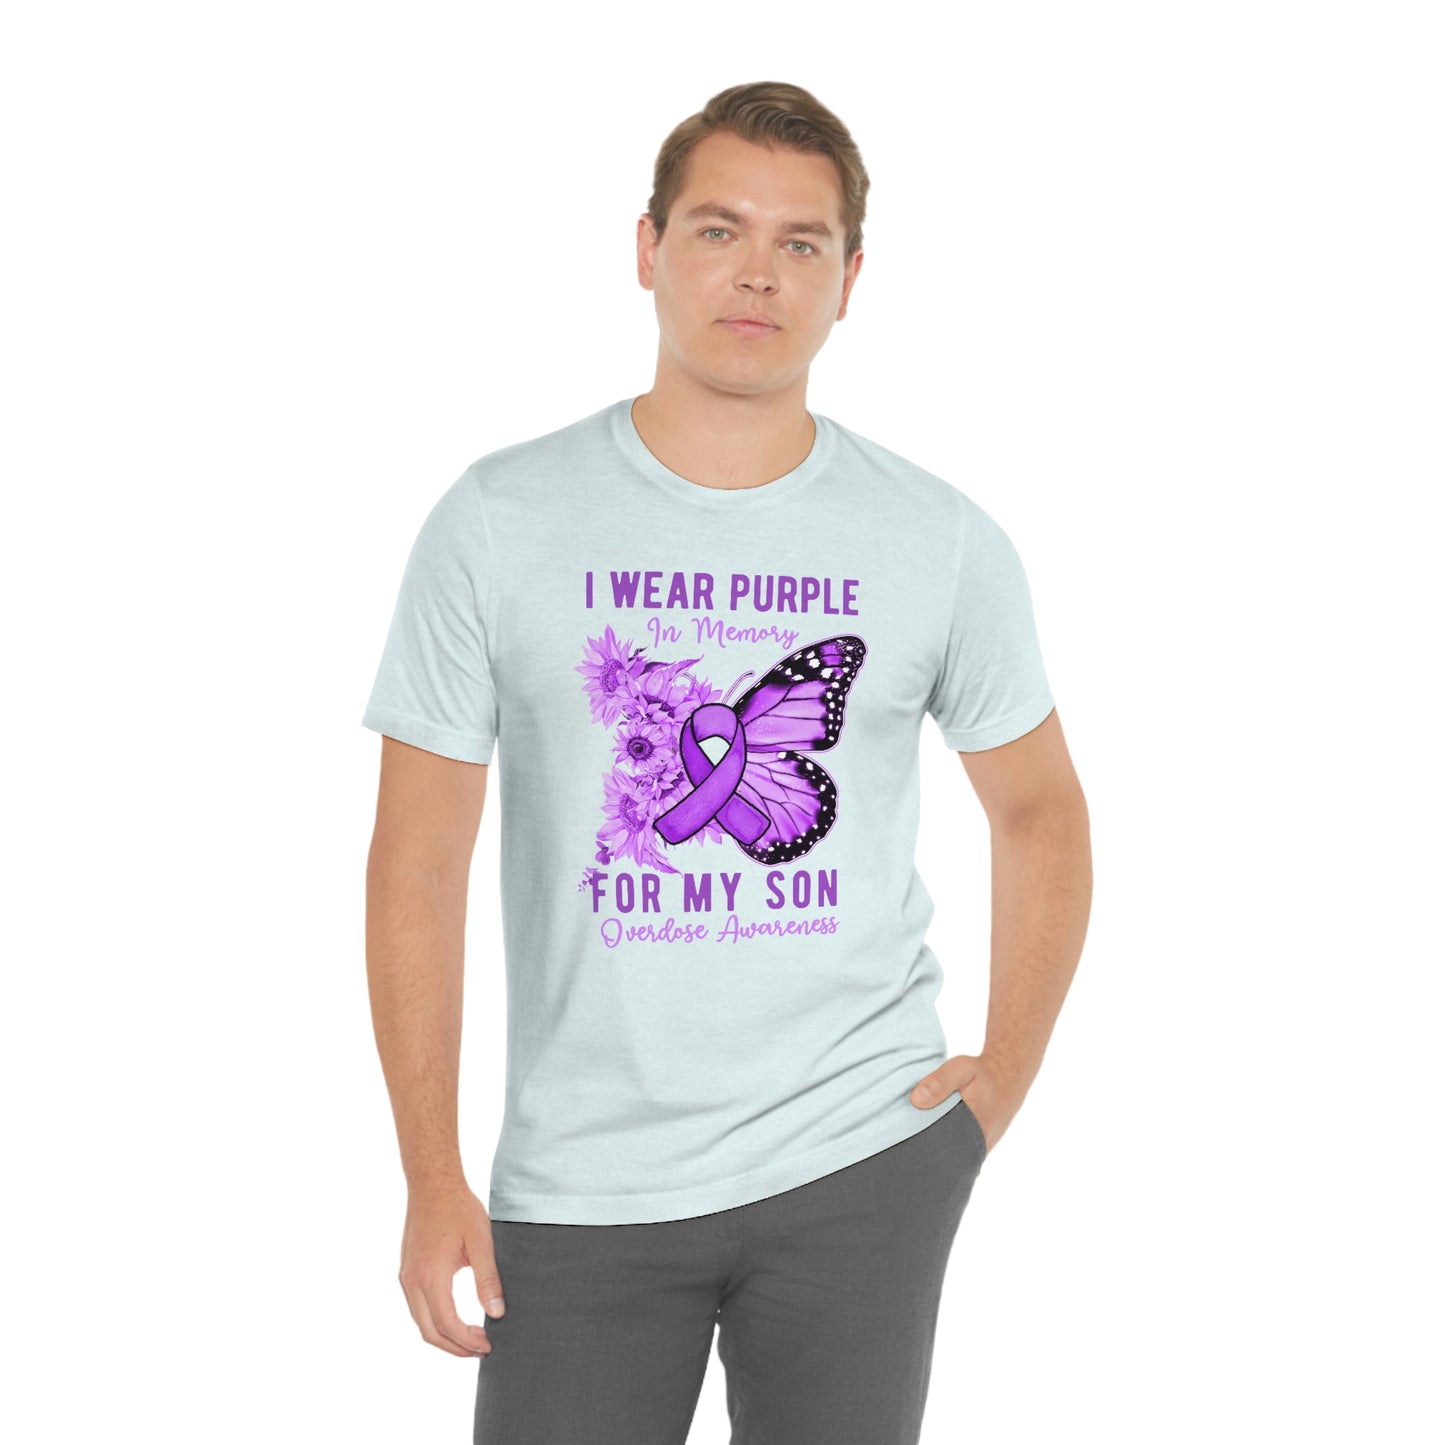 I Wear Purple In Memory For My Son Overdose Awareness Print Unisex Jersey Short Sleeve Tee